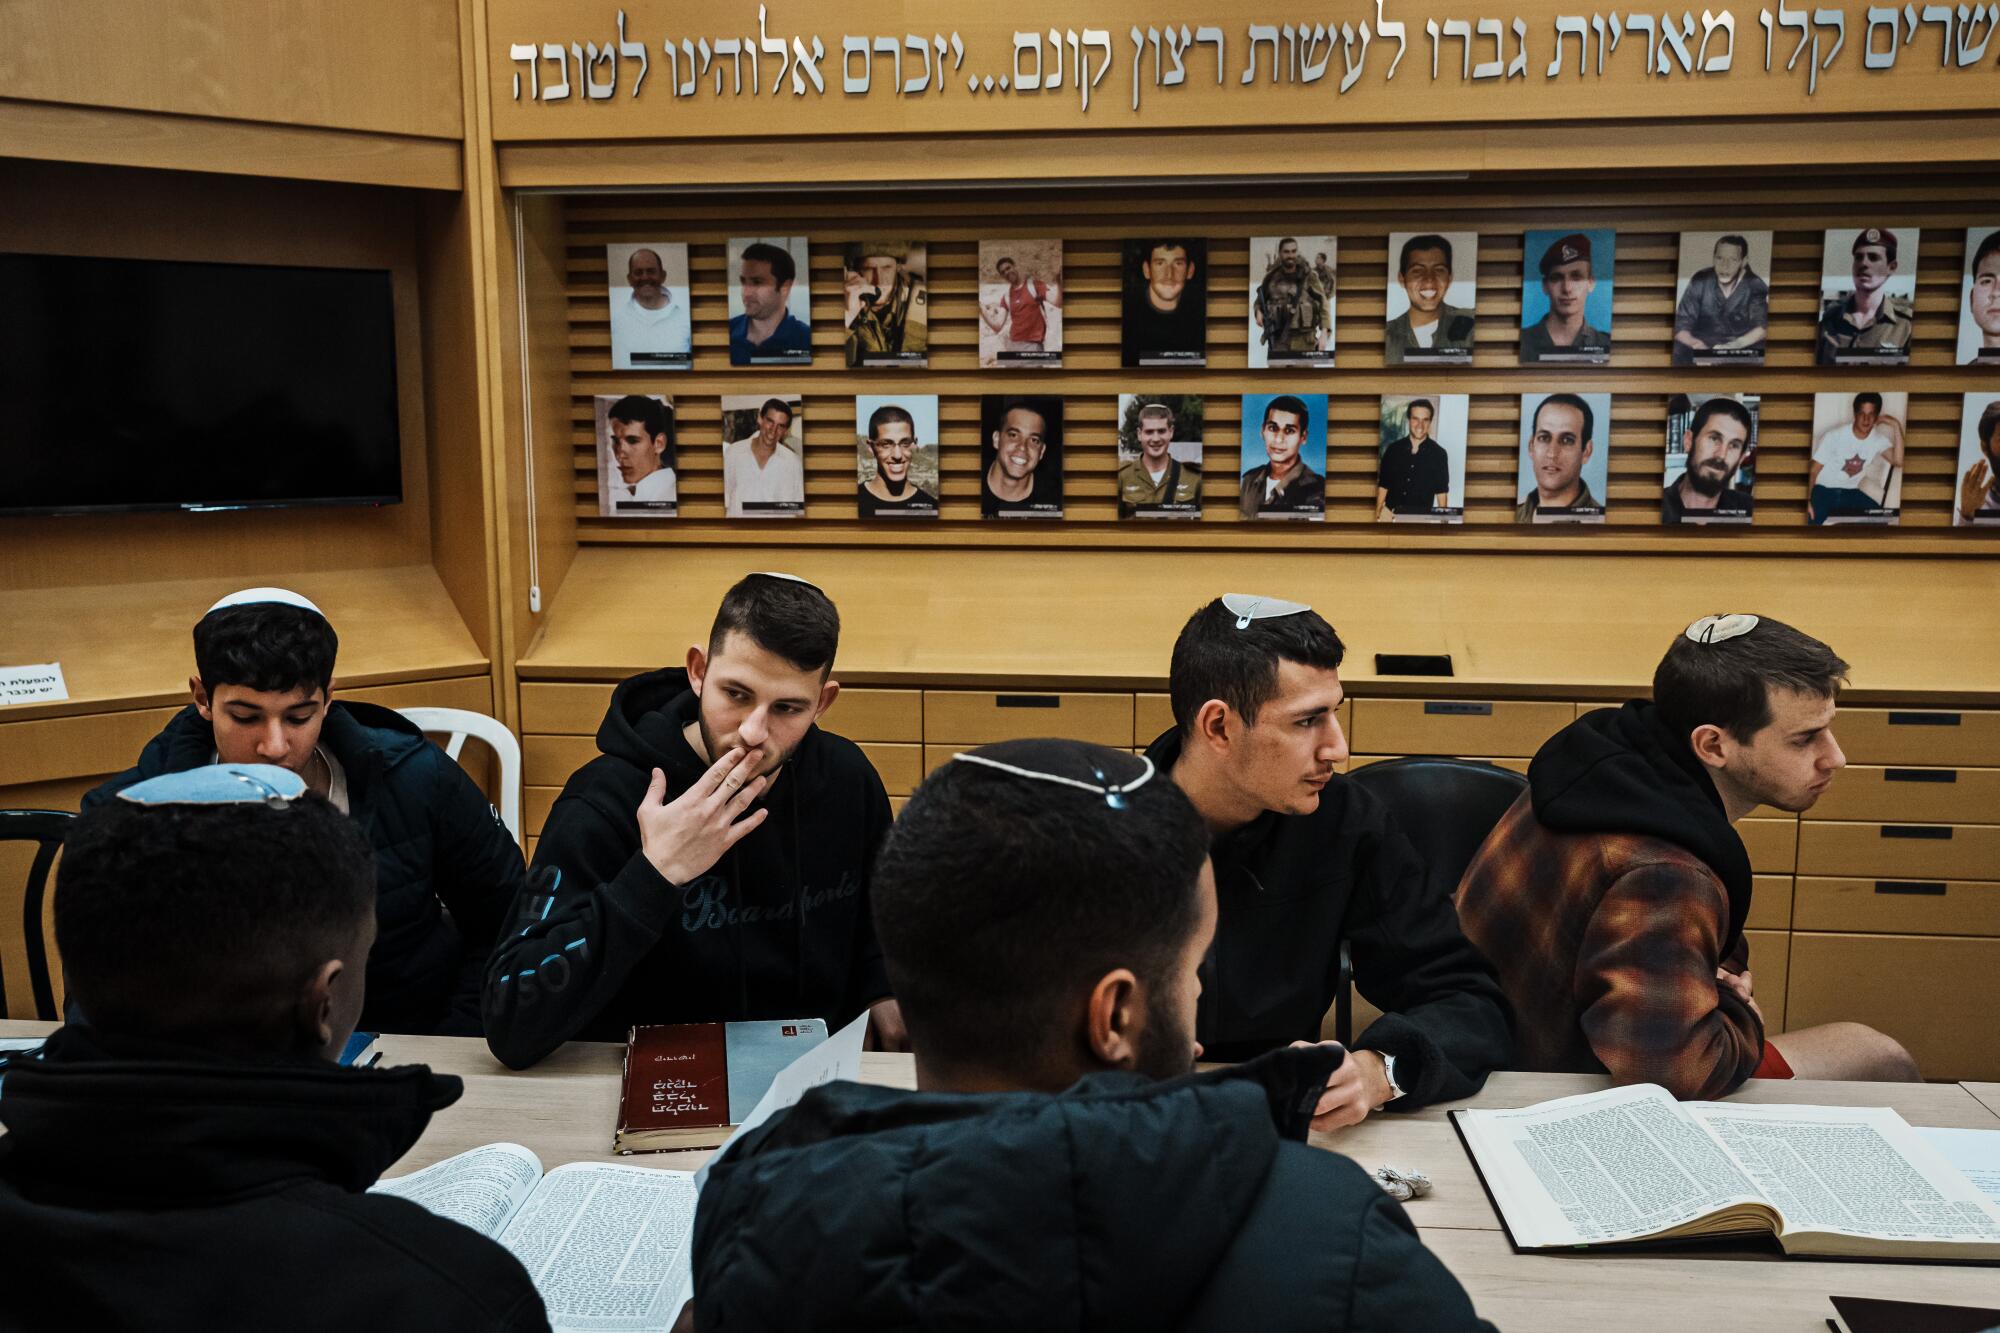 Young men in yarmulkes sitting at a table with books and papers, in front of a display with two rows of portraits